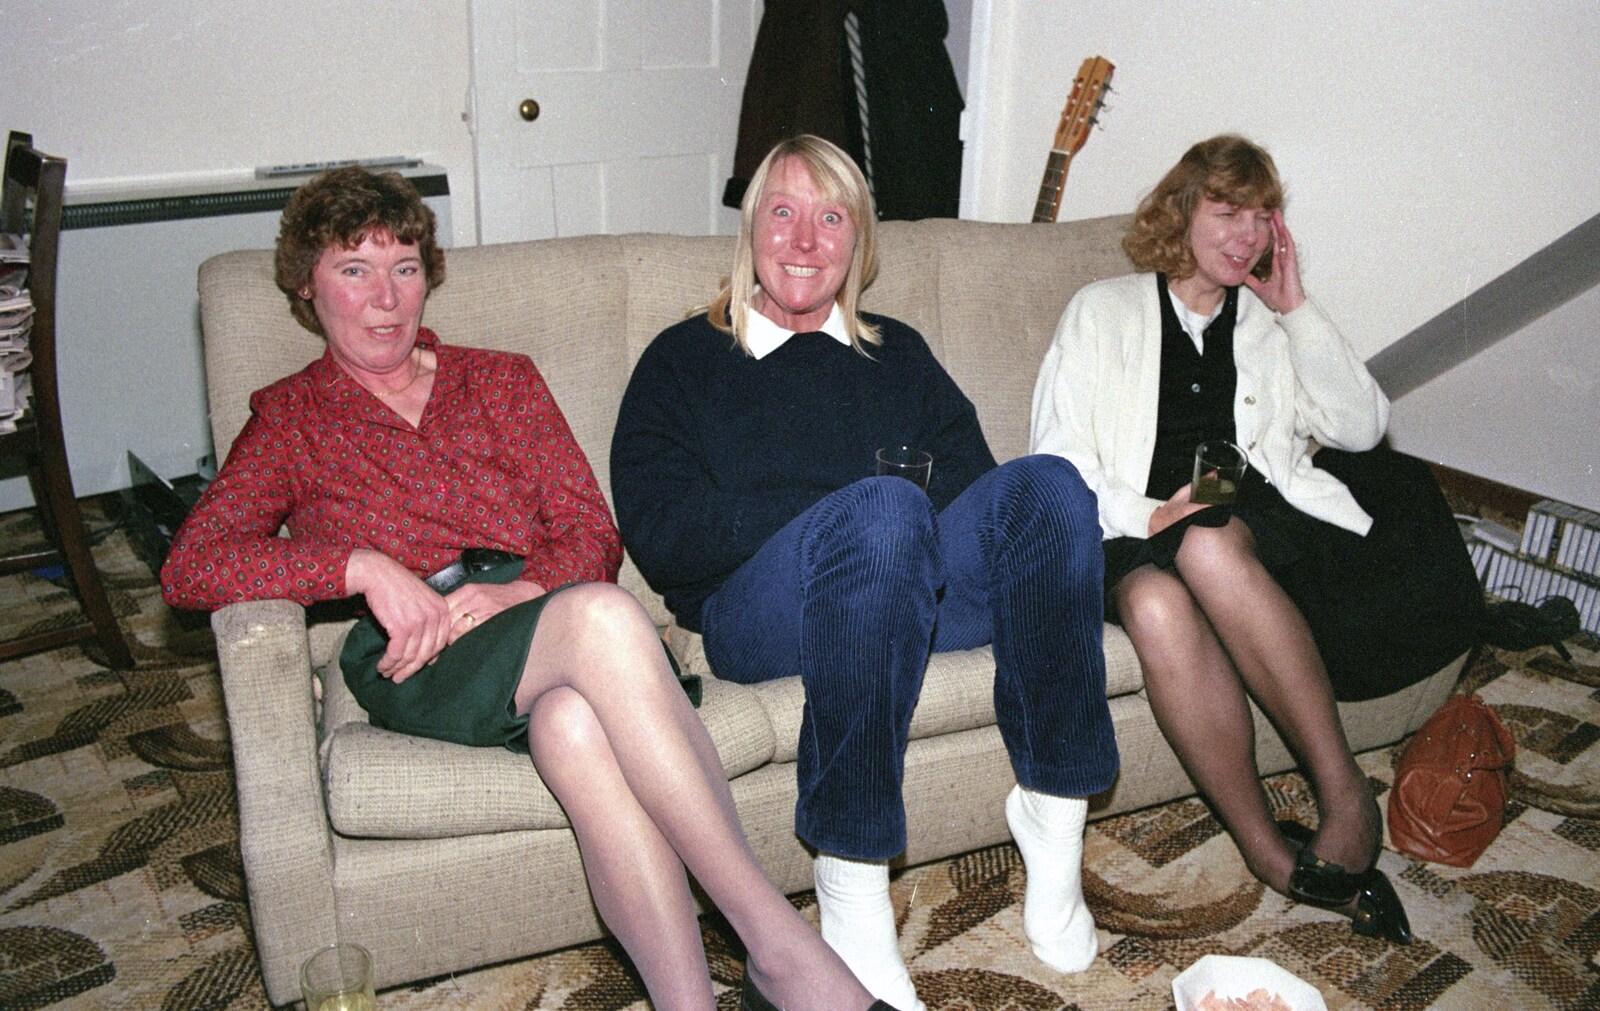 Brenda, 'Mad' Sue and Janet in the lounge from Carol Singing and Late Night Shopping, Stuston, Diss and Harleston, Norfolk - 16th December 1990